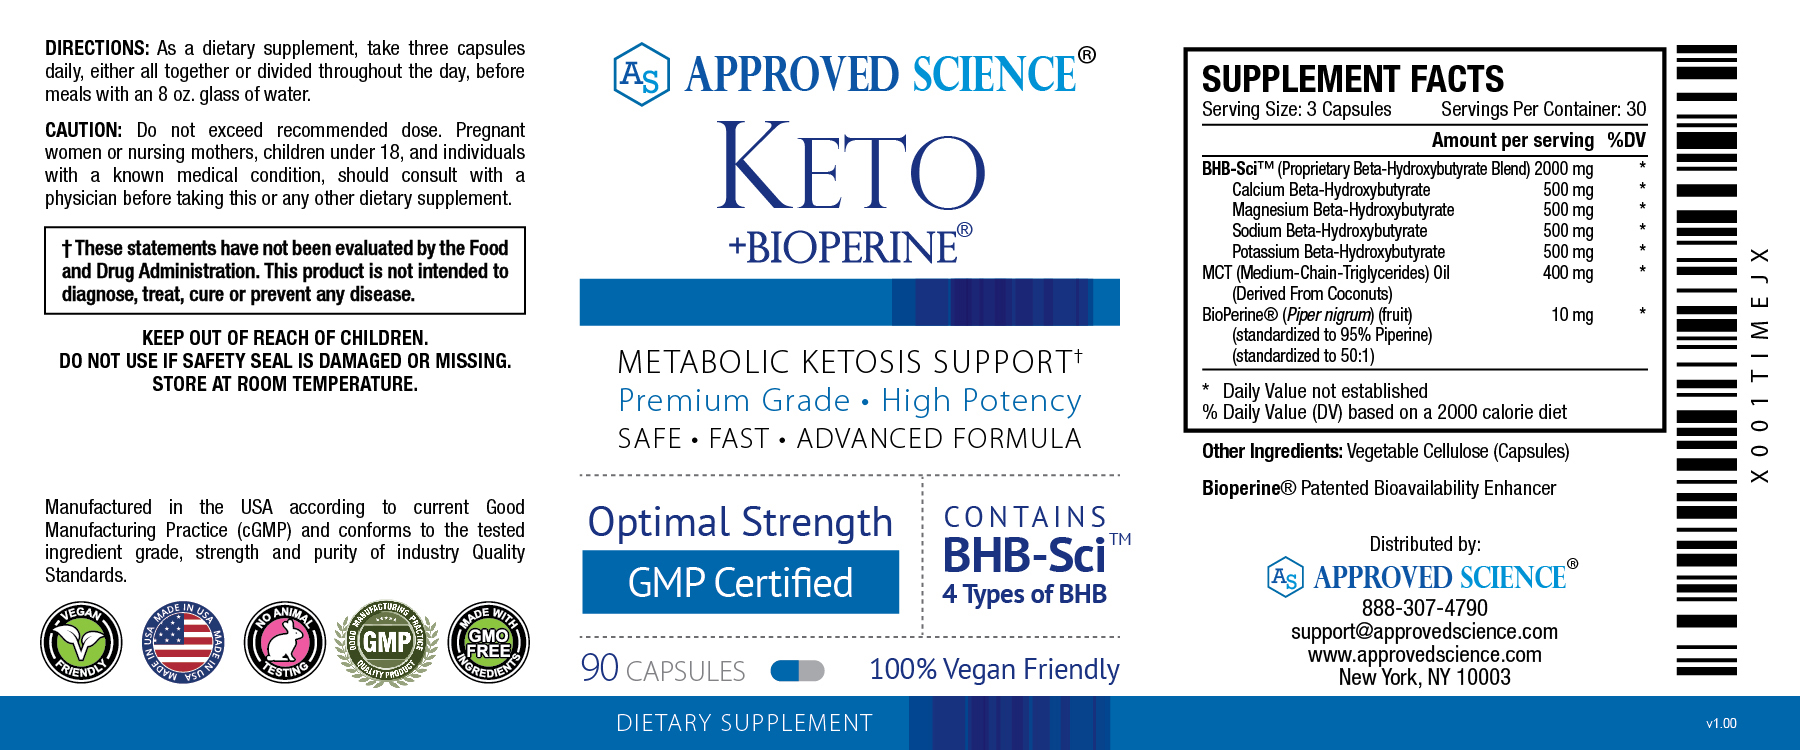 Approved Science® Keto Supplement Facts